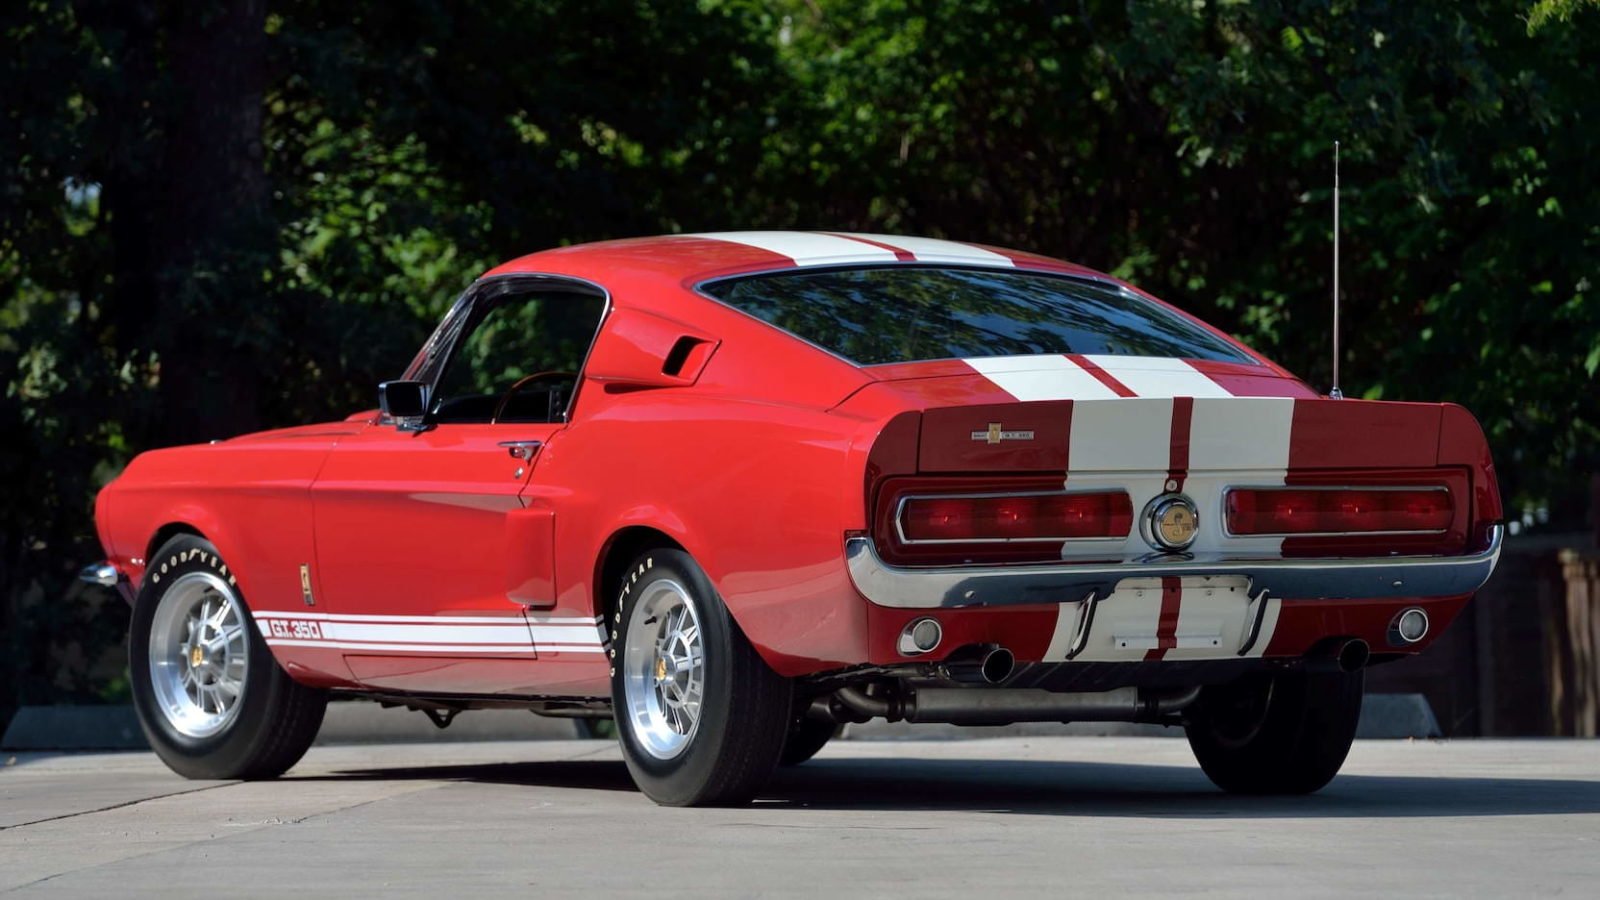 For Sale: A 1967 Shelby GT350 - American V8 Royalty